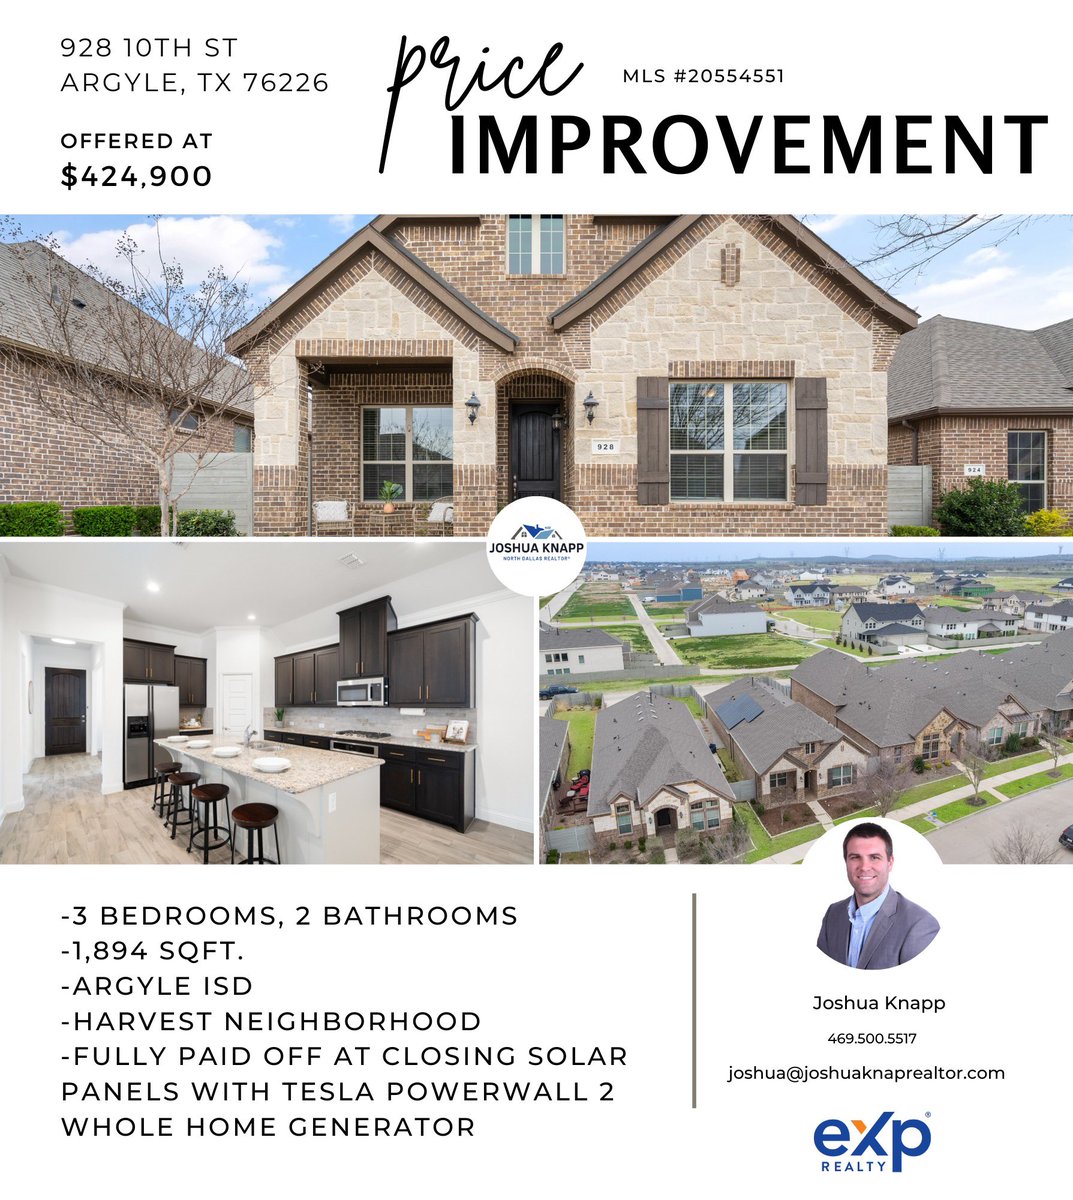 Price Improvement in #argyletx 
🏠 3 bedrooms, 2 bathrooms
1,894 sqft. 
#solarpanels that will be fully paid off at closing
@harvesttexas #knappknowshomes